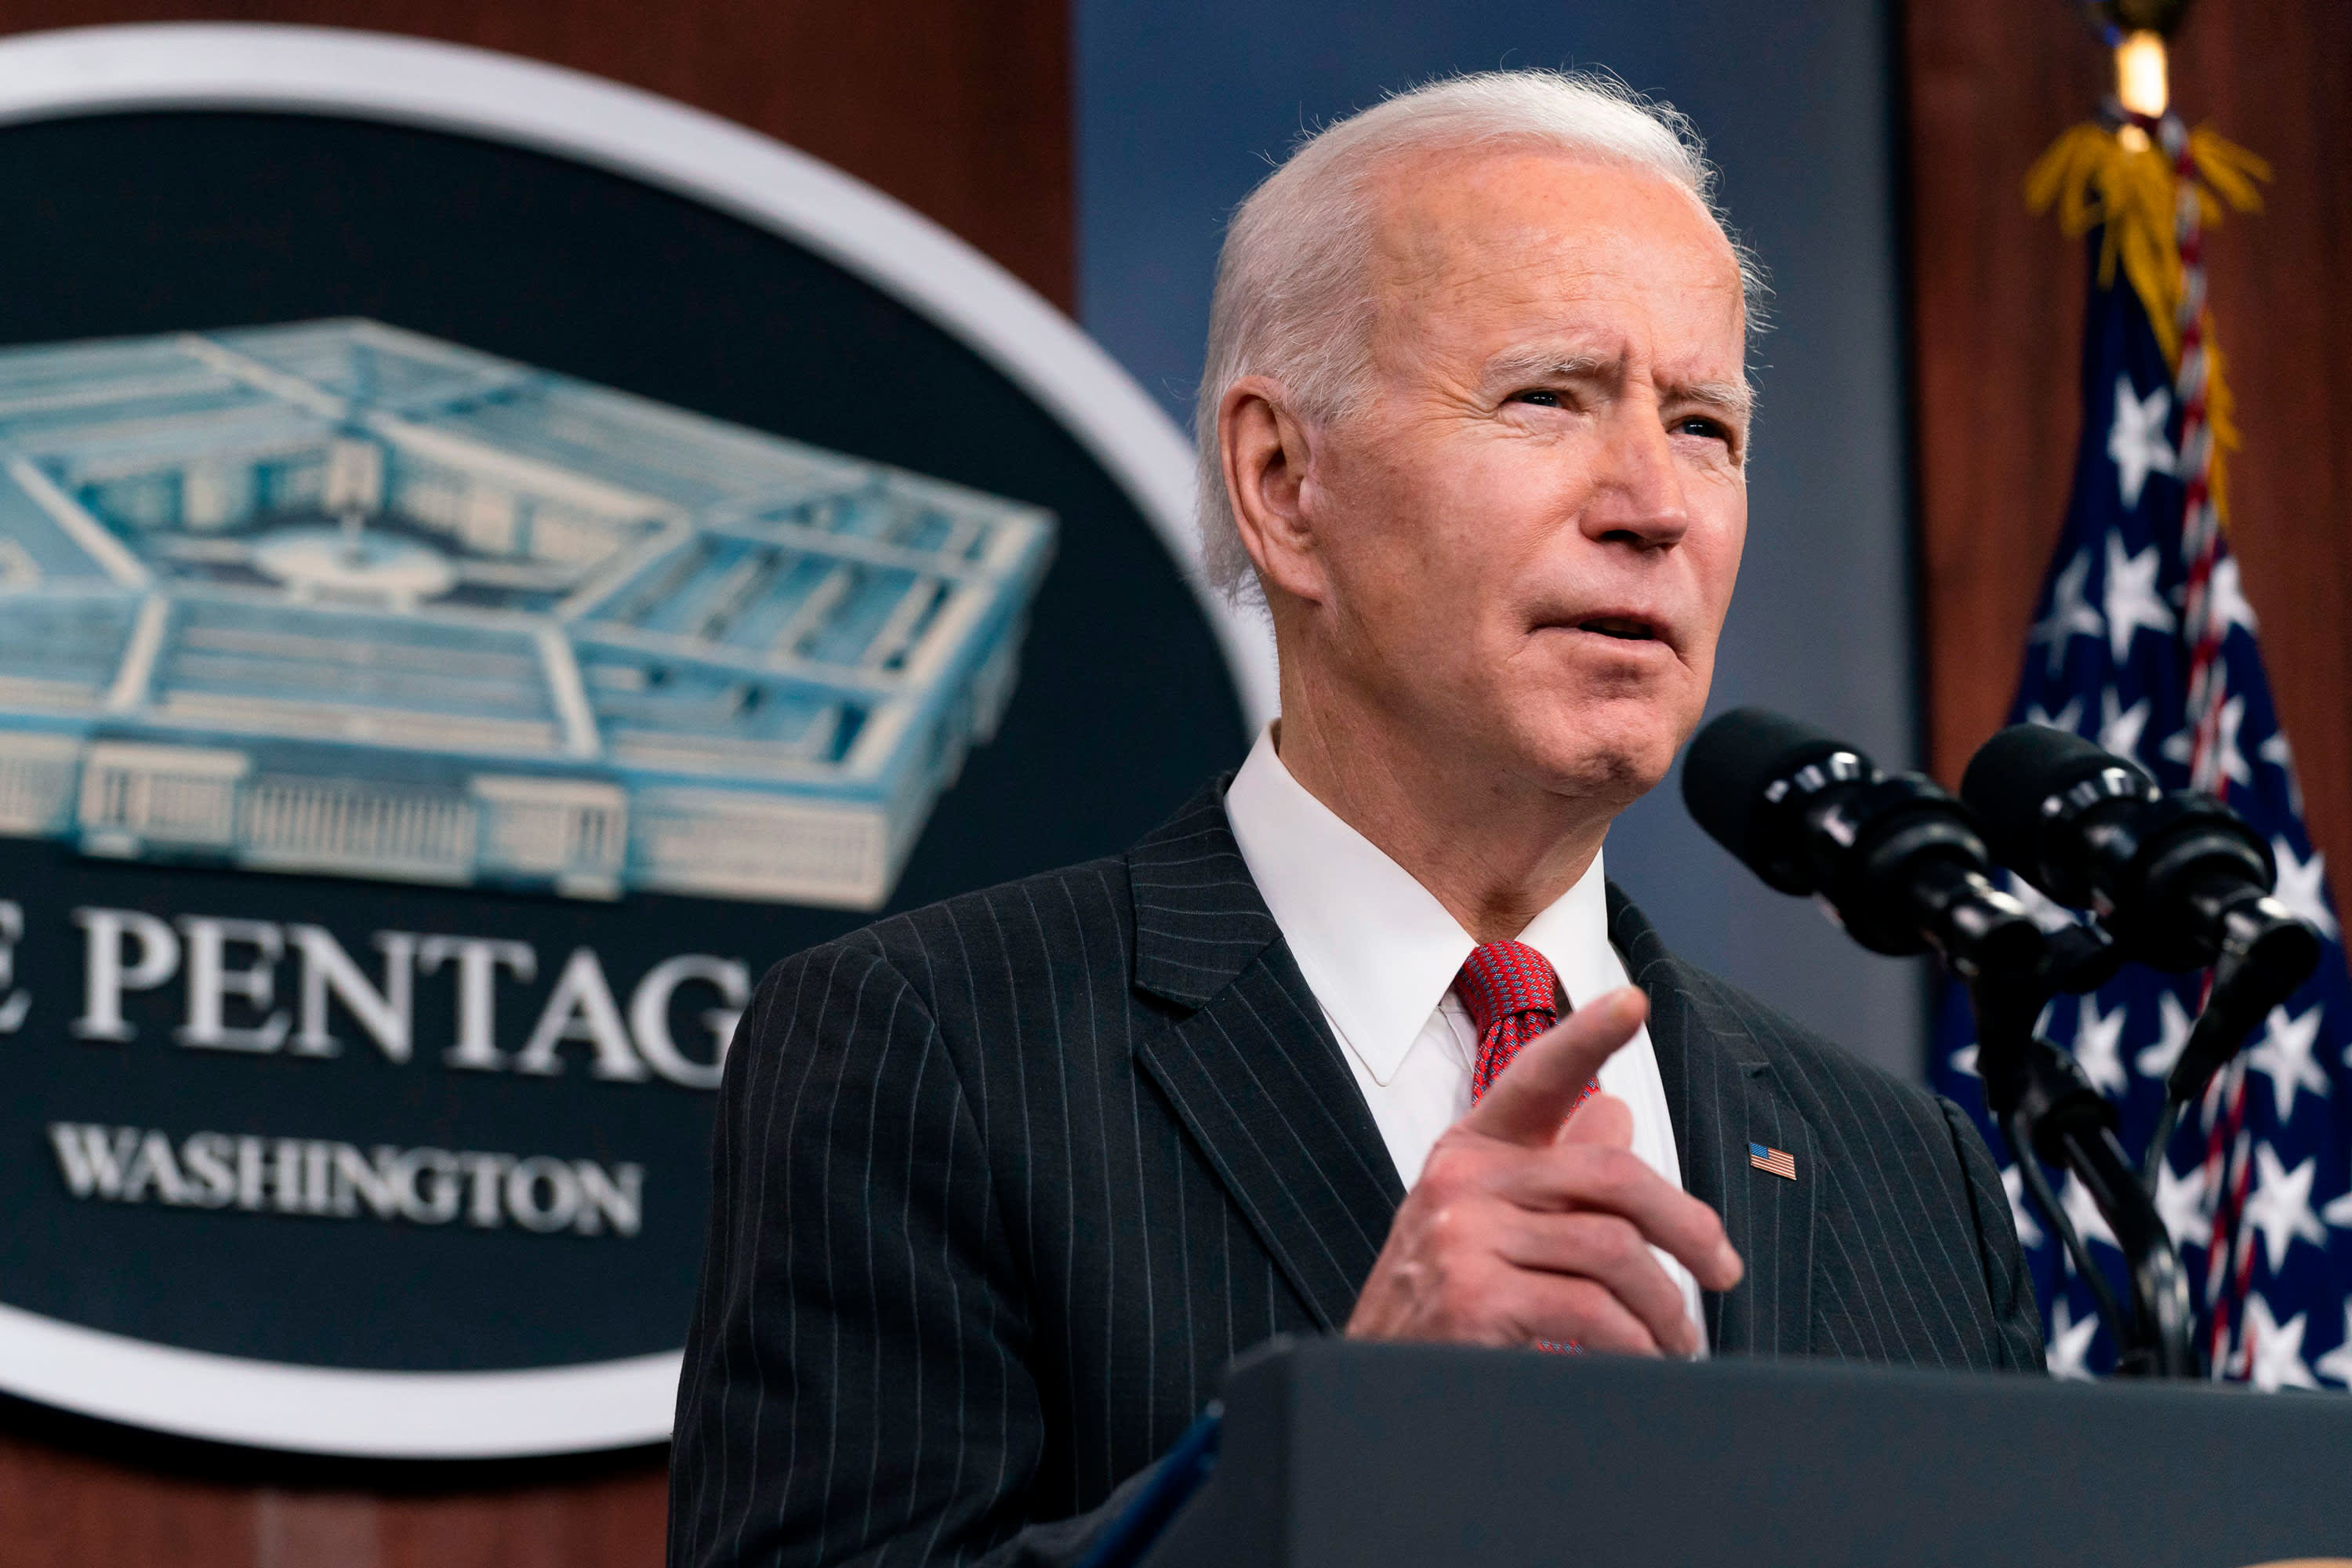 Biden signs executive order to address chip shortage through supply chain review